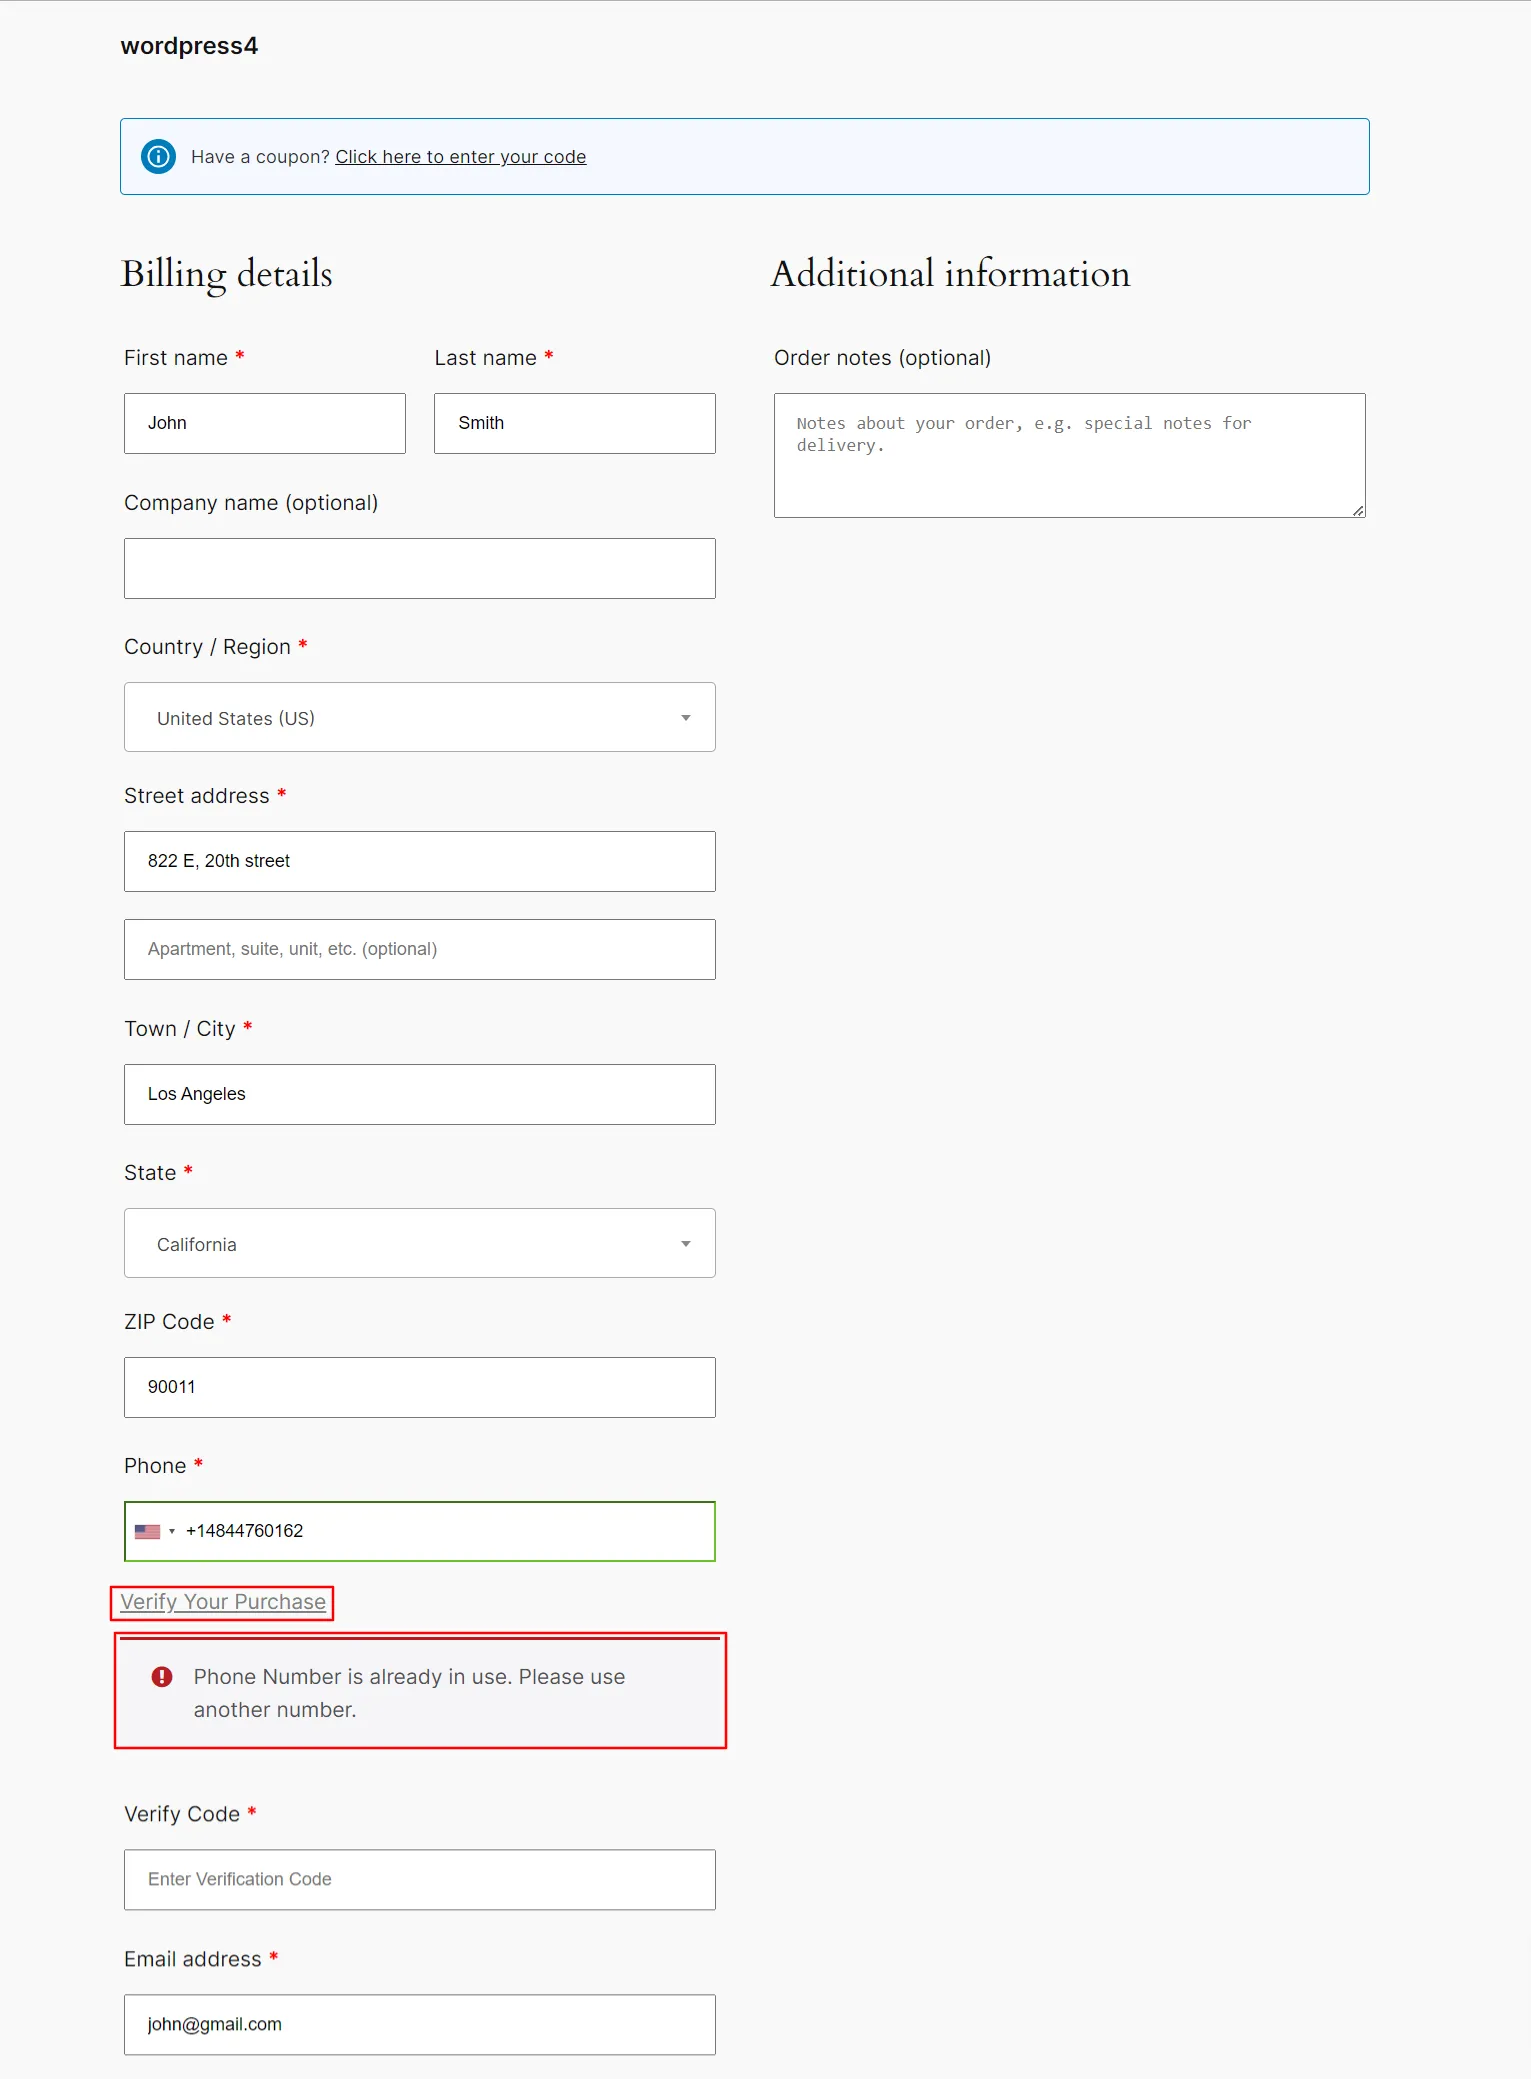 WooCommerce Checkout Form OTP - See error message